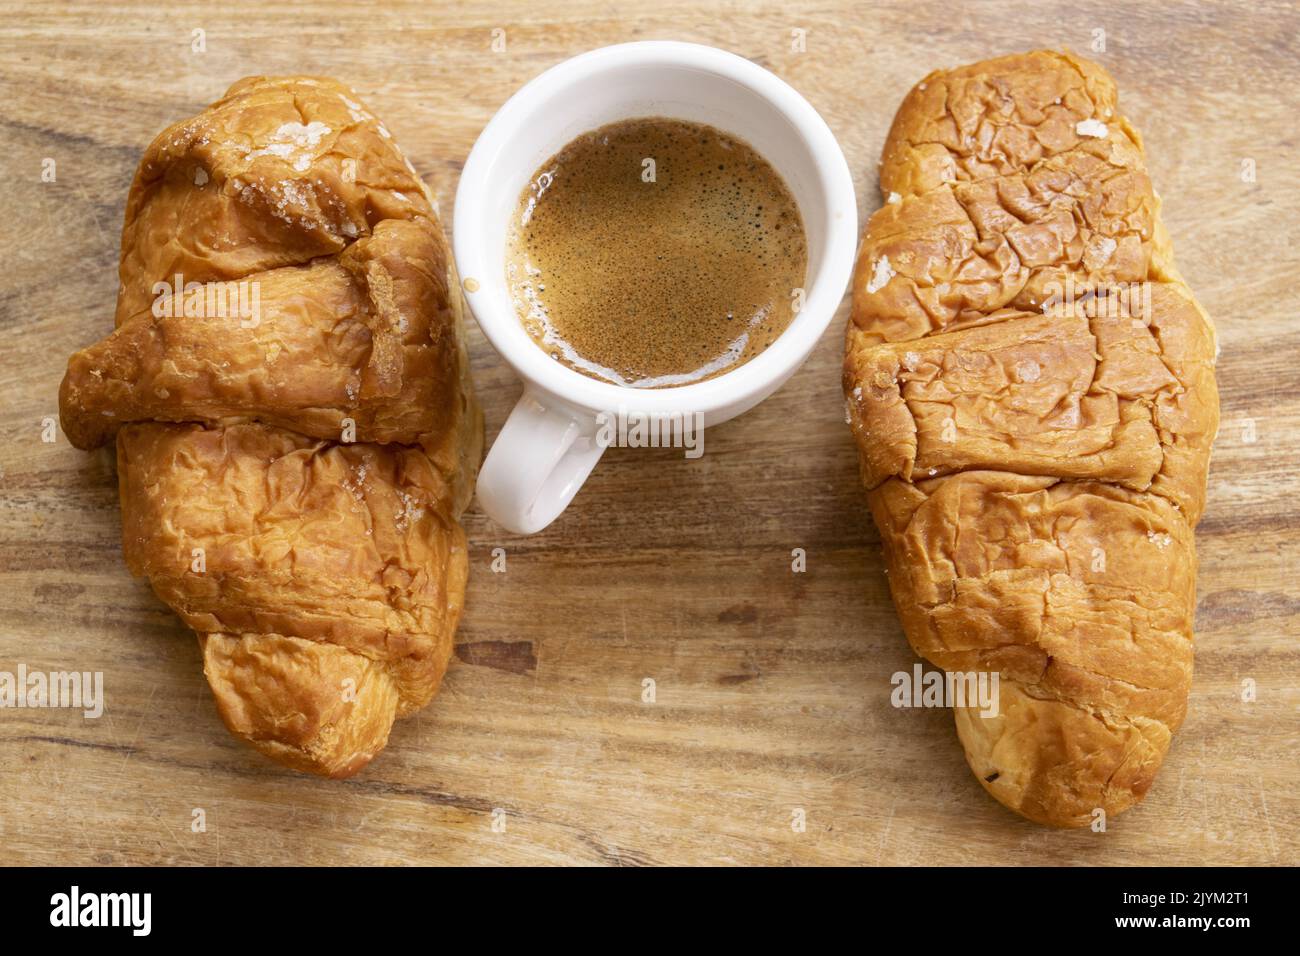 italian breakfast with short and creamy espresso and croissant Stock Photo